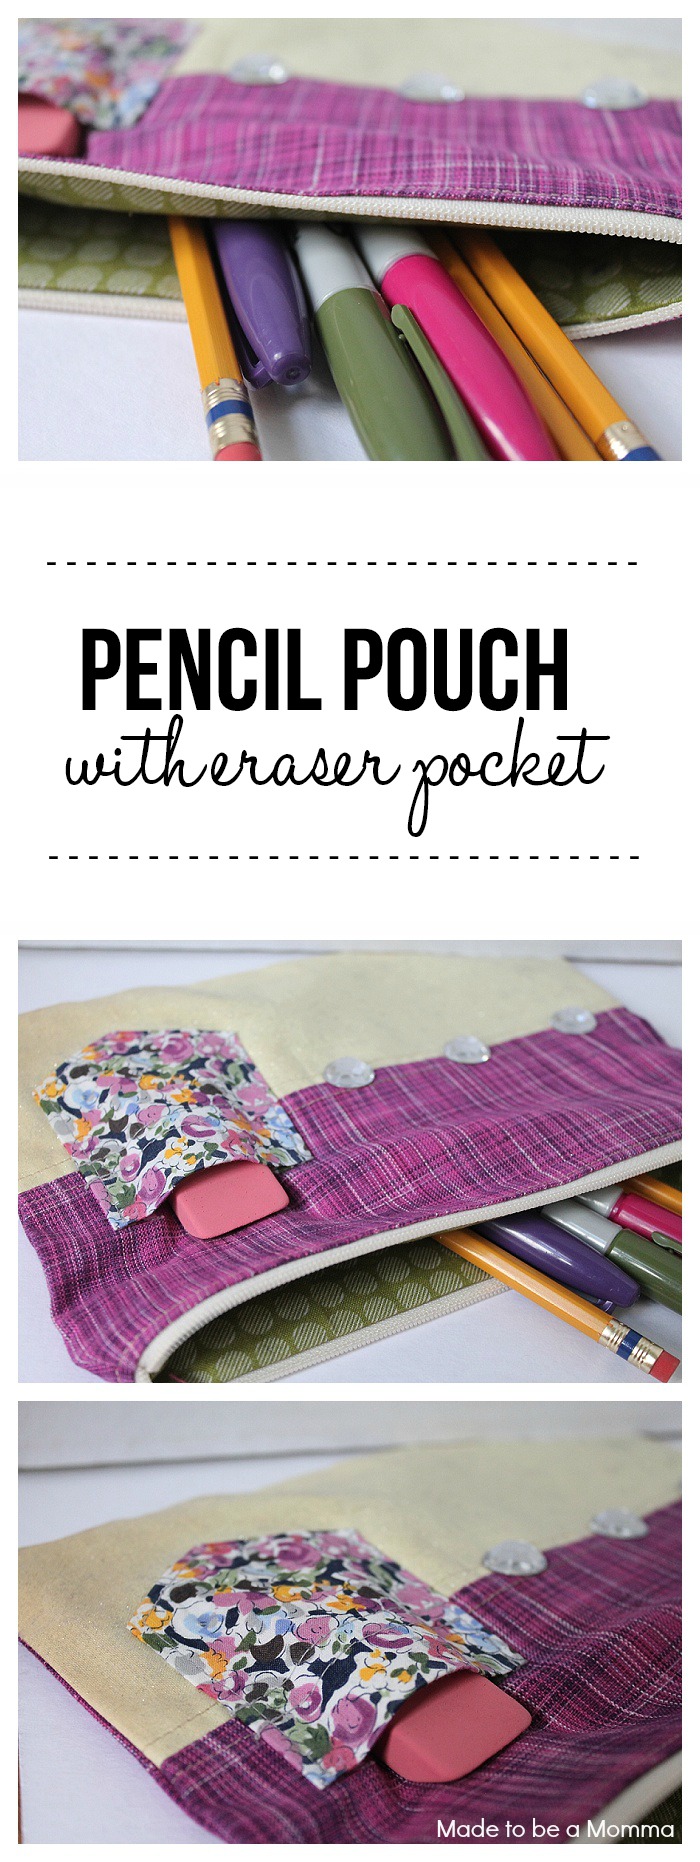 Pencil Pouch with Eraser Pocket